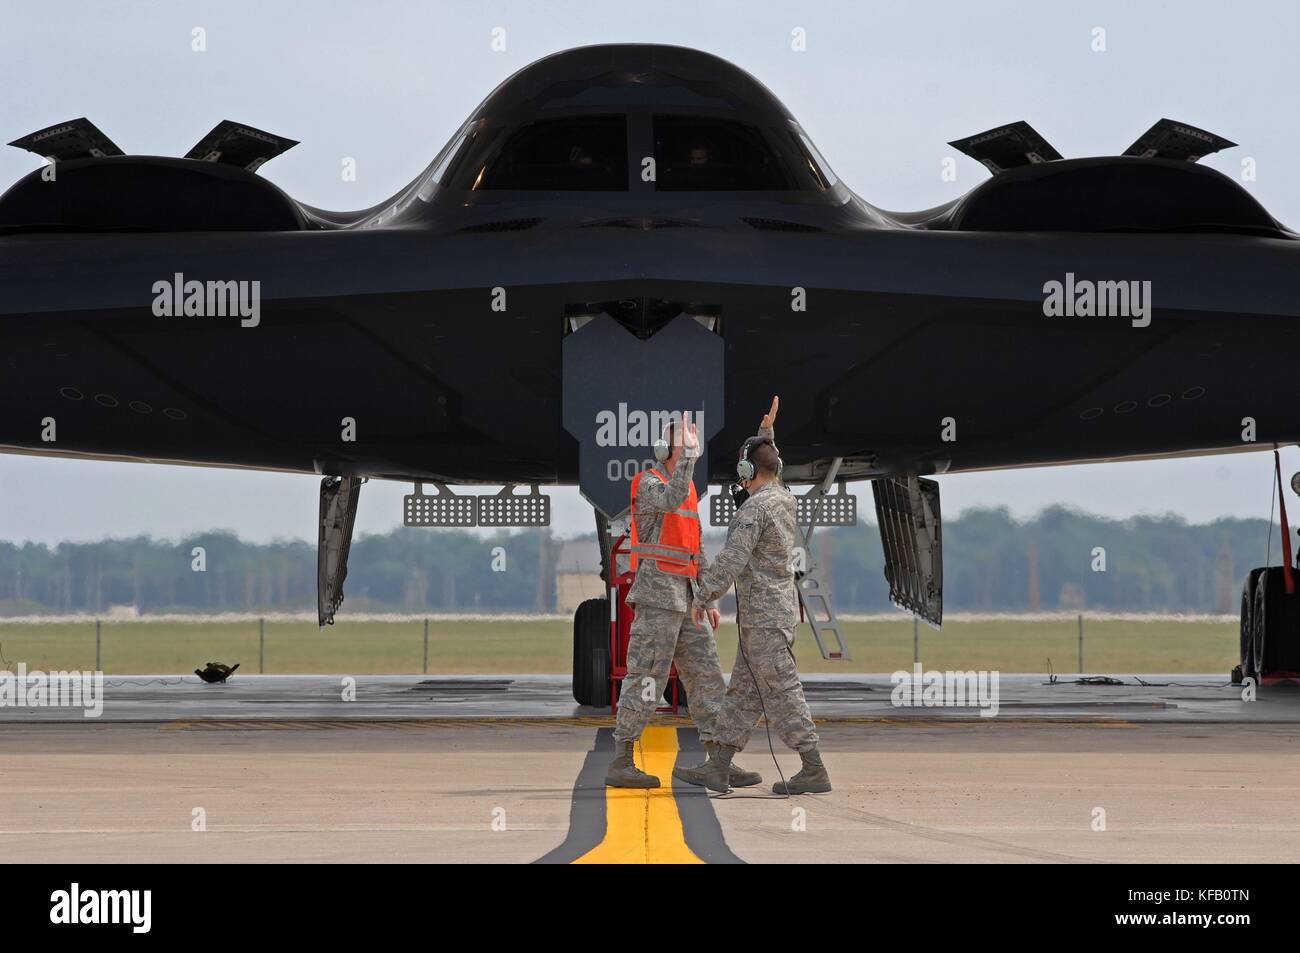 U.S. Air Force pilots give each other a high-five on the runway in front of a U.S. Air Force B-2 Spirit stealth bomber aircraft at the Whiteman Air Force Base September 8, 2009 near Knob Noster, Missouri.    (photo by Kenny Holston via Planetpix) Stock Photo